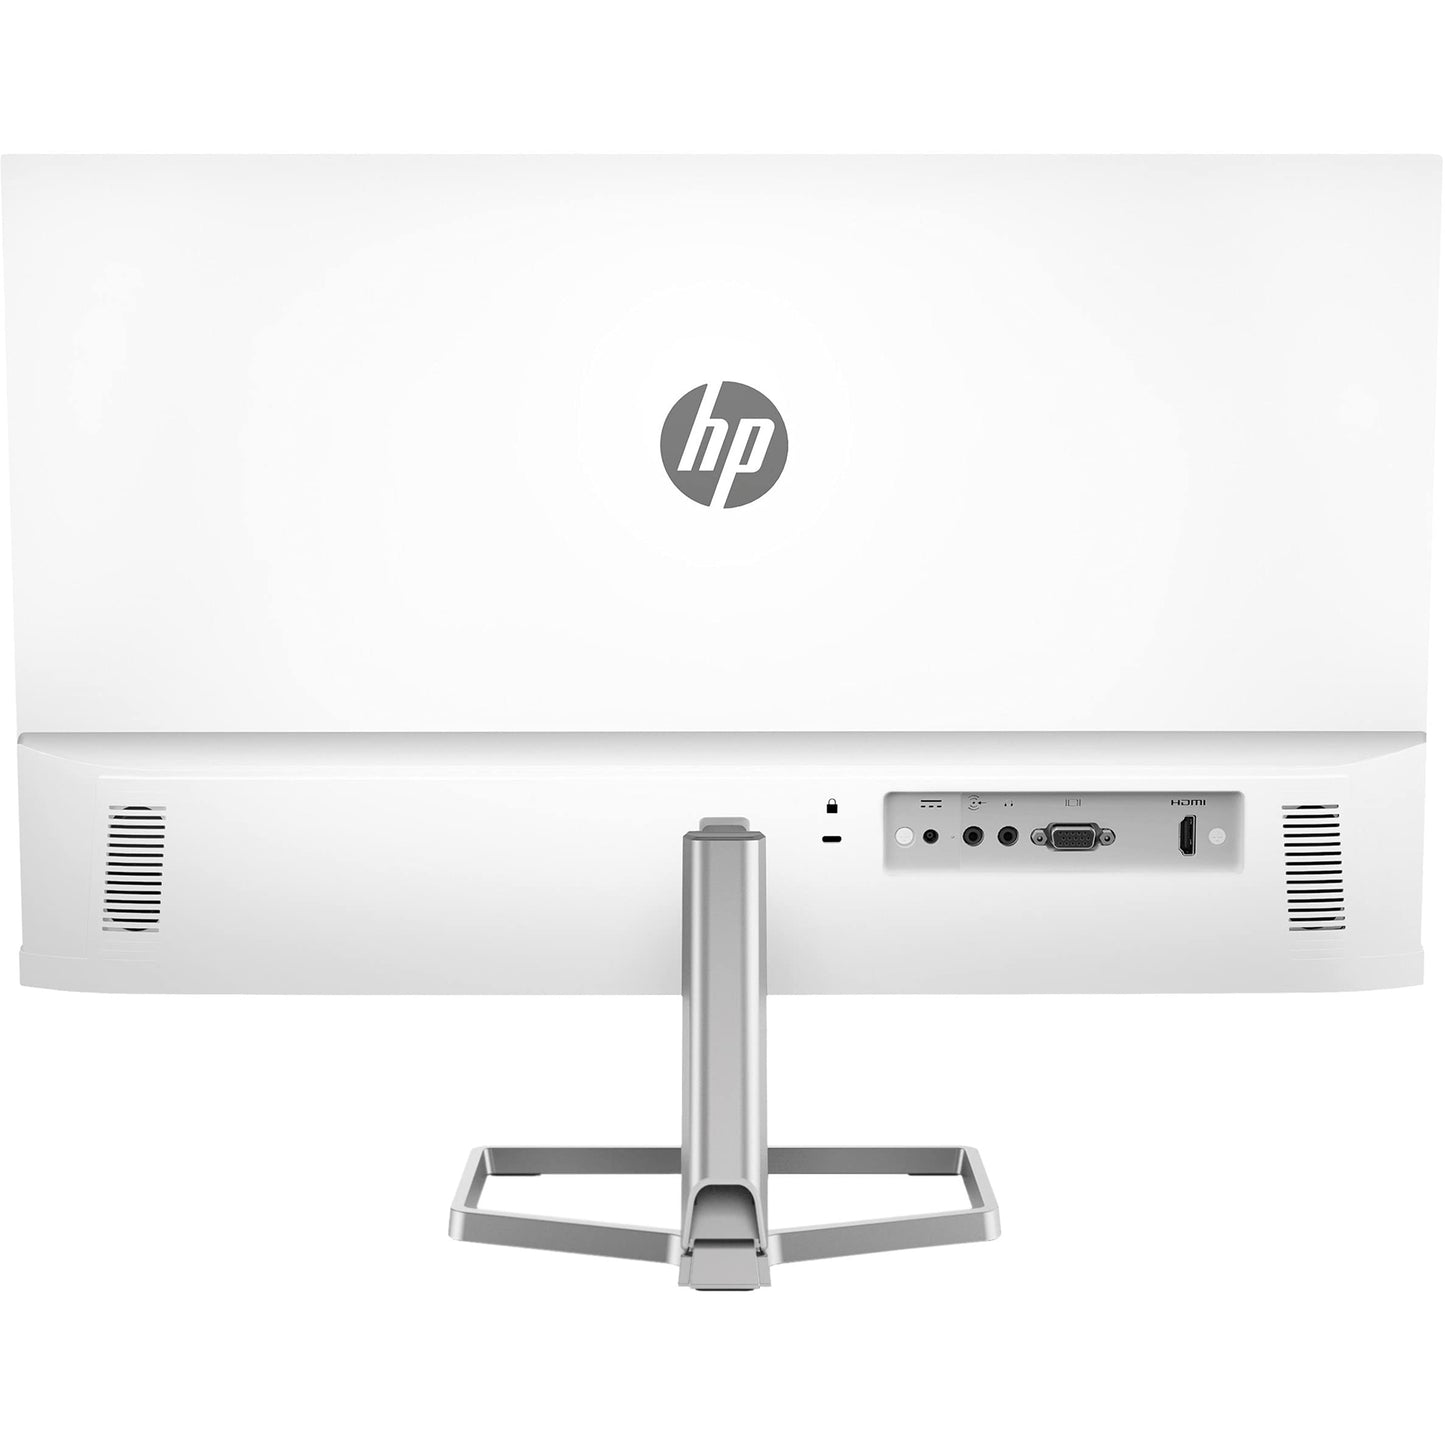 HP M24fwa 23.8-in FHD IPS LED Backlit Monitor with Audio White Color, VGA